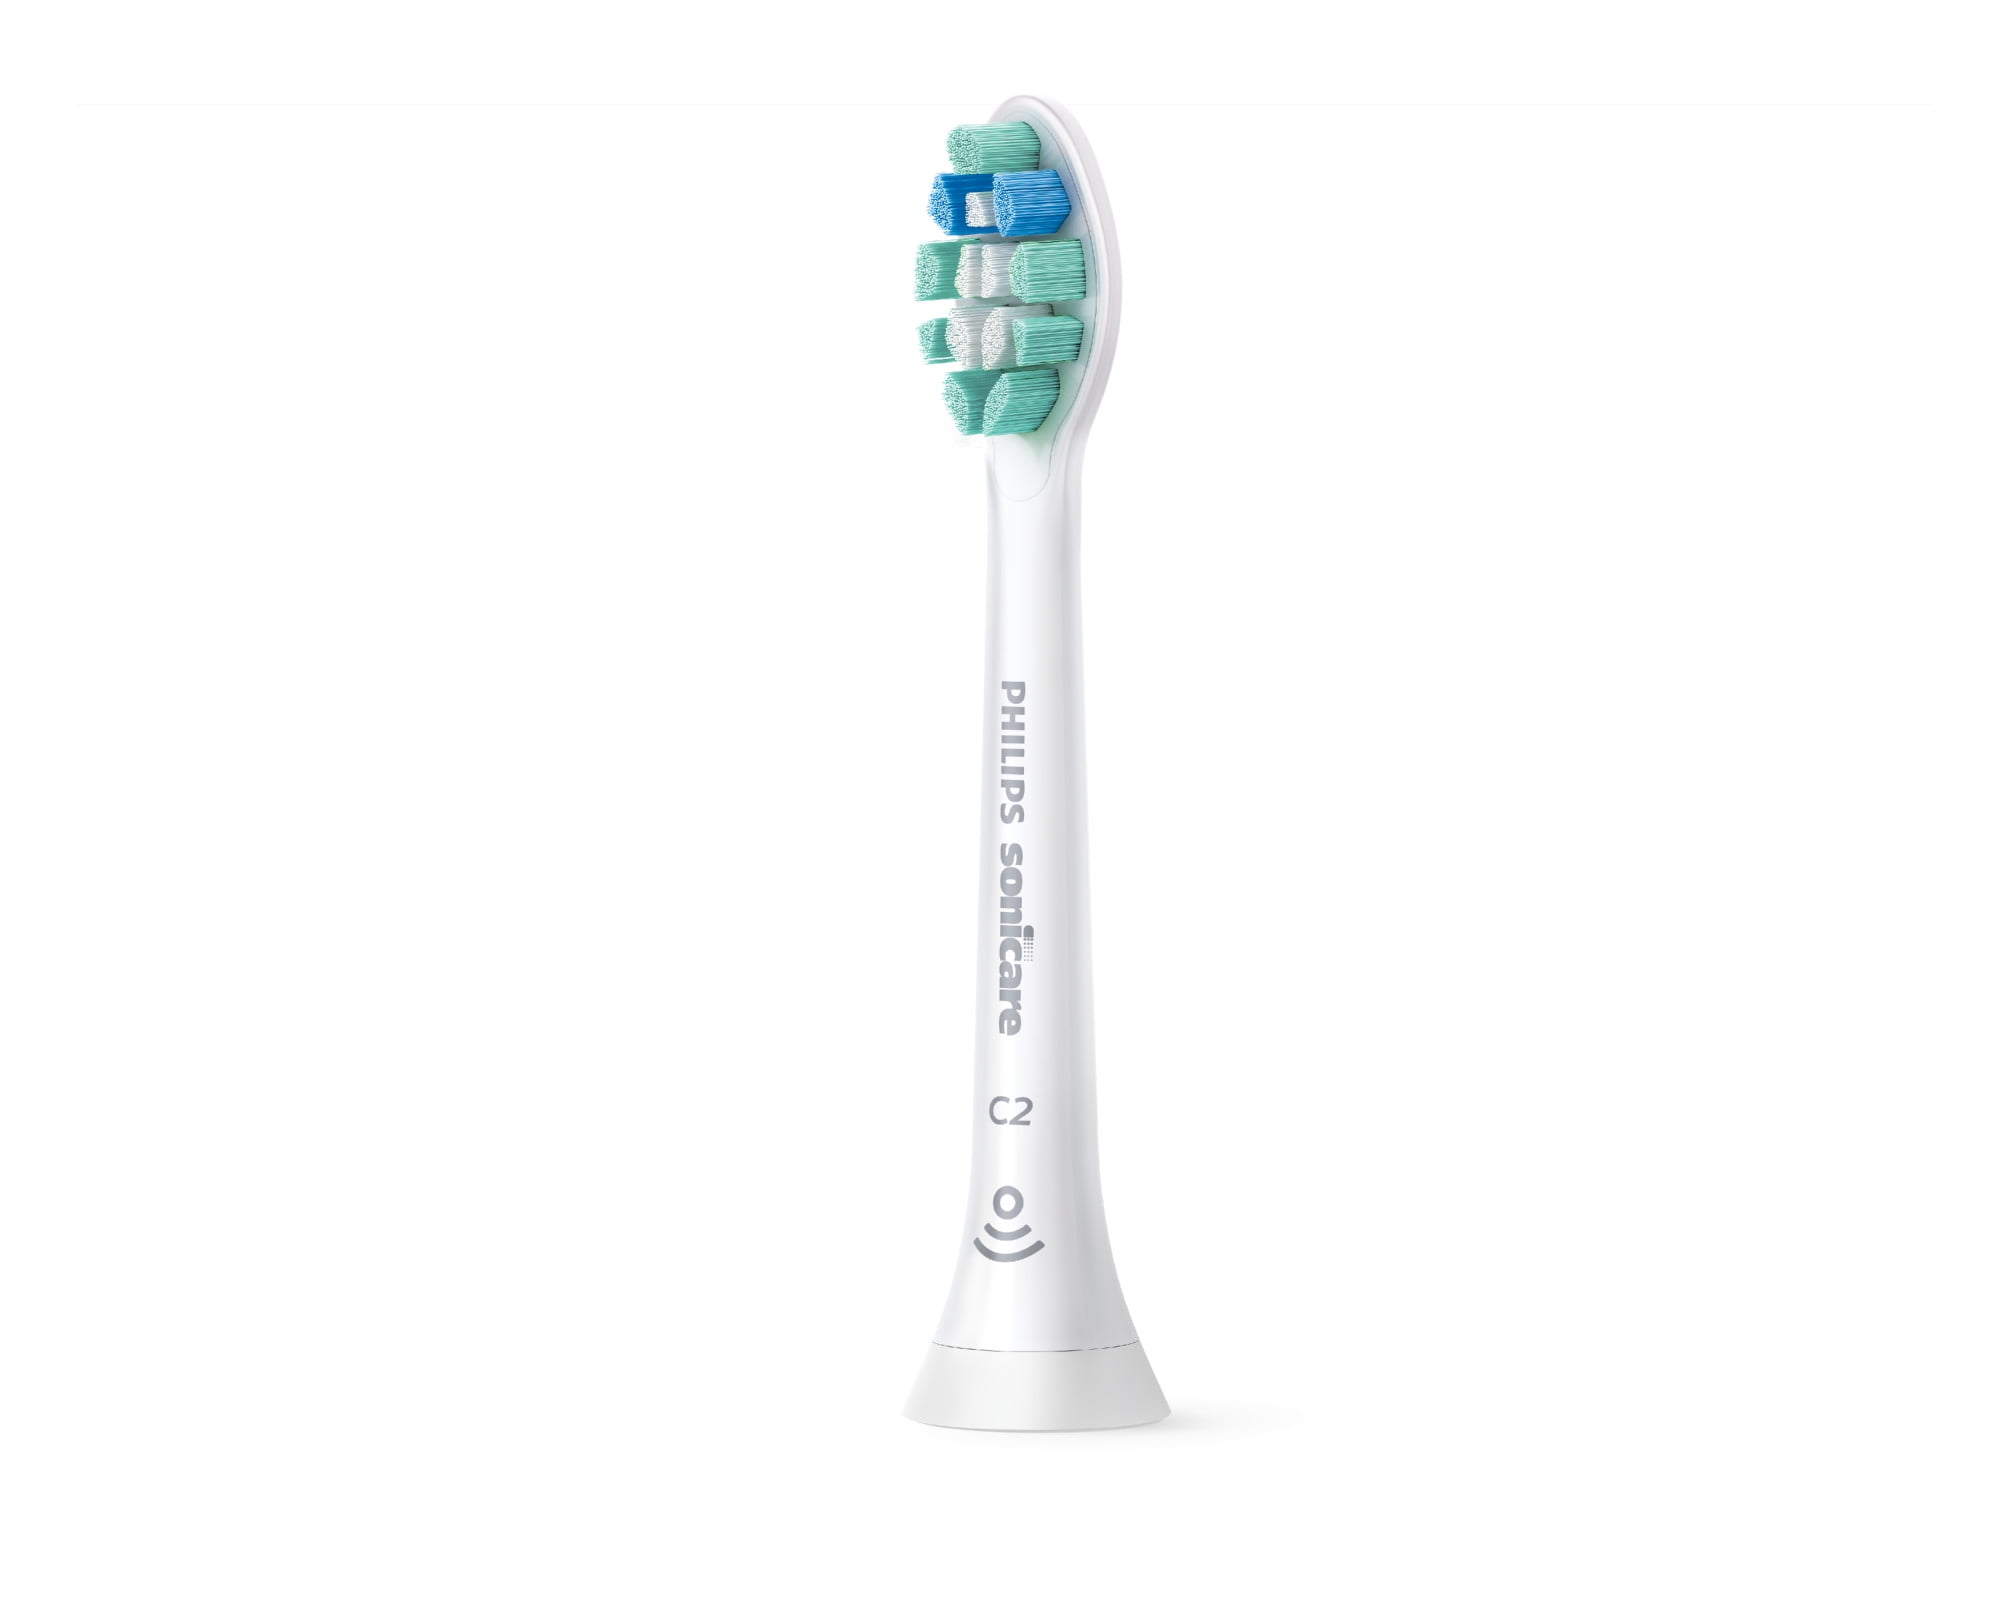 Philips Sonicare ProtectiveClean 4100 Plaque Control, Rechargeable Electric  Toothbrush with Pressure Sensor, White Mint HX6817/01 - Walmart.com